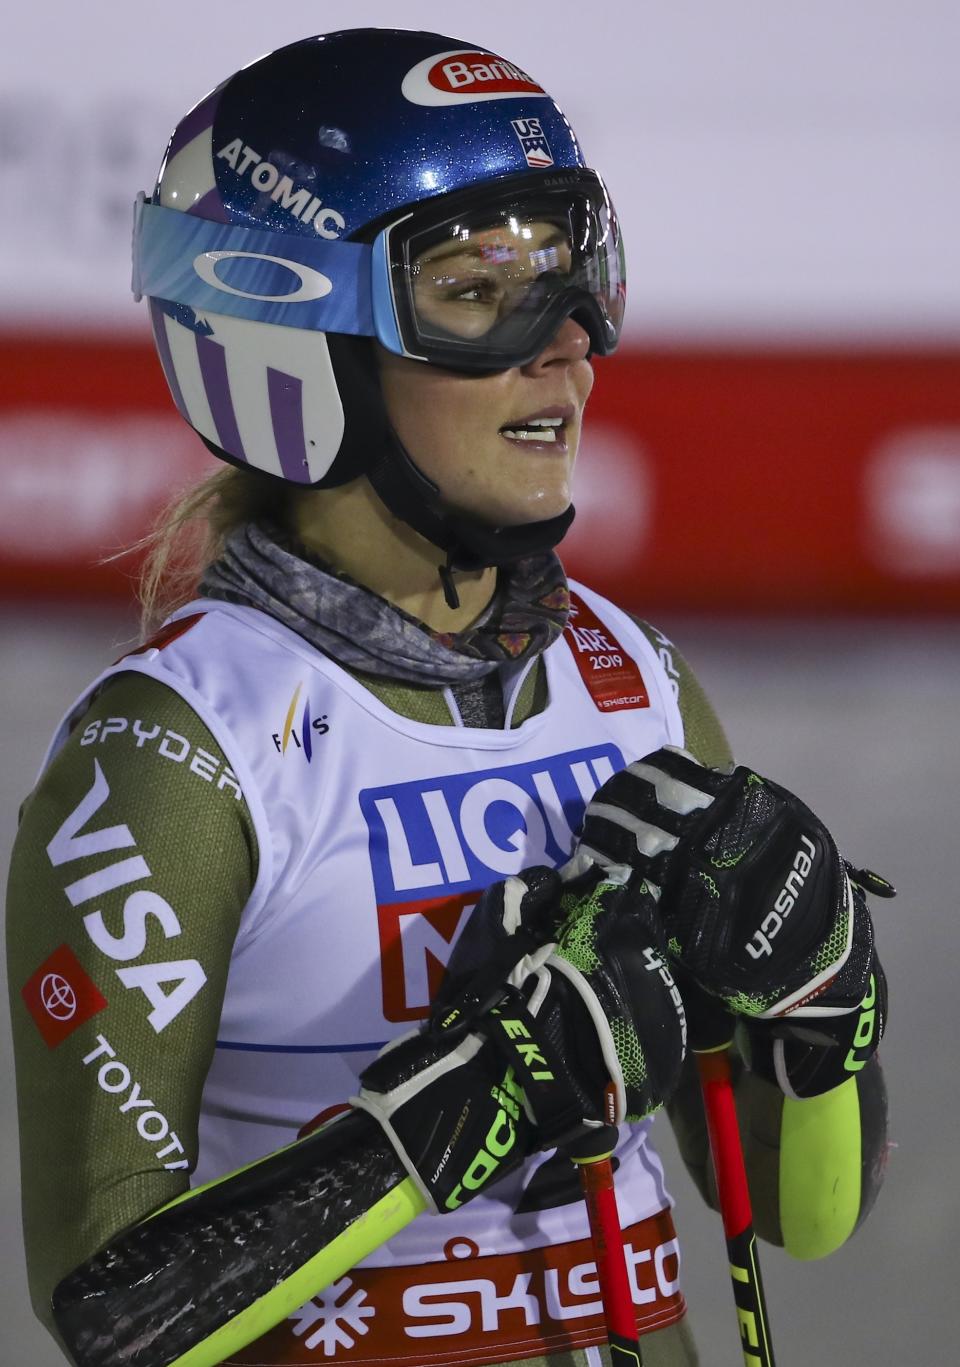 United States' Mikaela Shiffrin gets to the finish area of the women's giant slalom, at the alpine ski World Championships in Are, Sweden, Thursday, Feb. 14, 2019. (AP Photo/Marco Trovati)